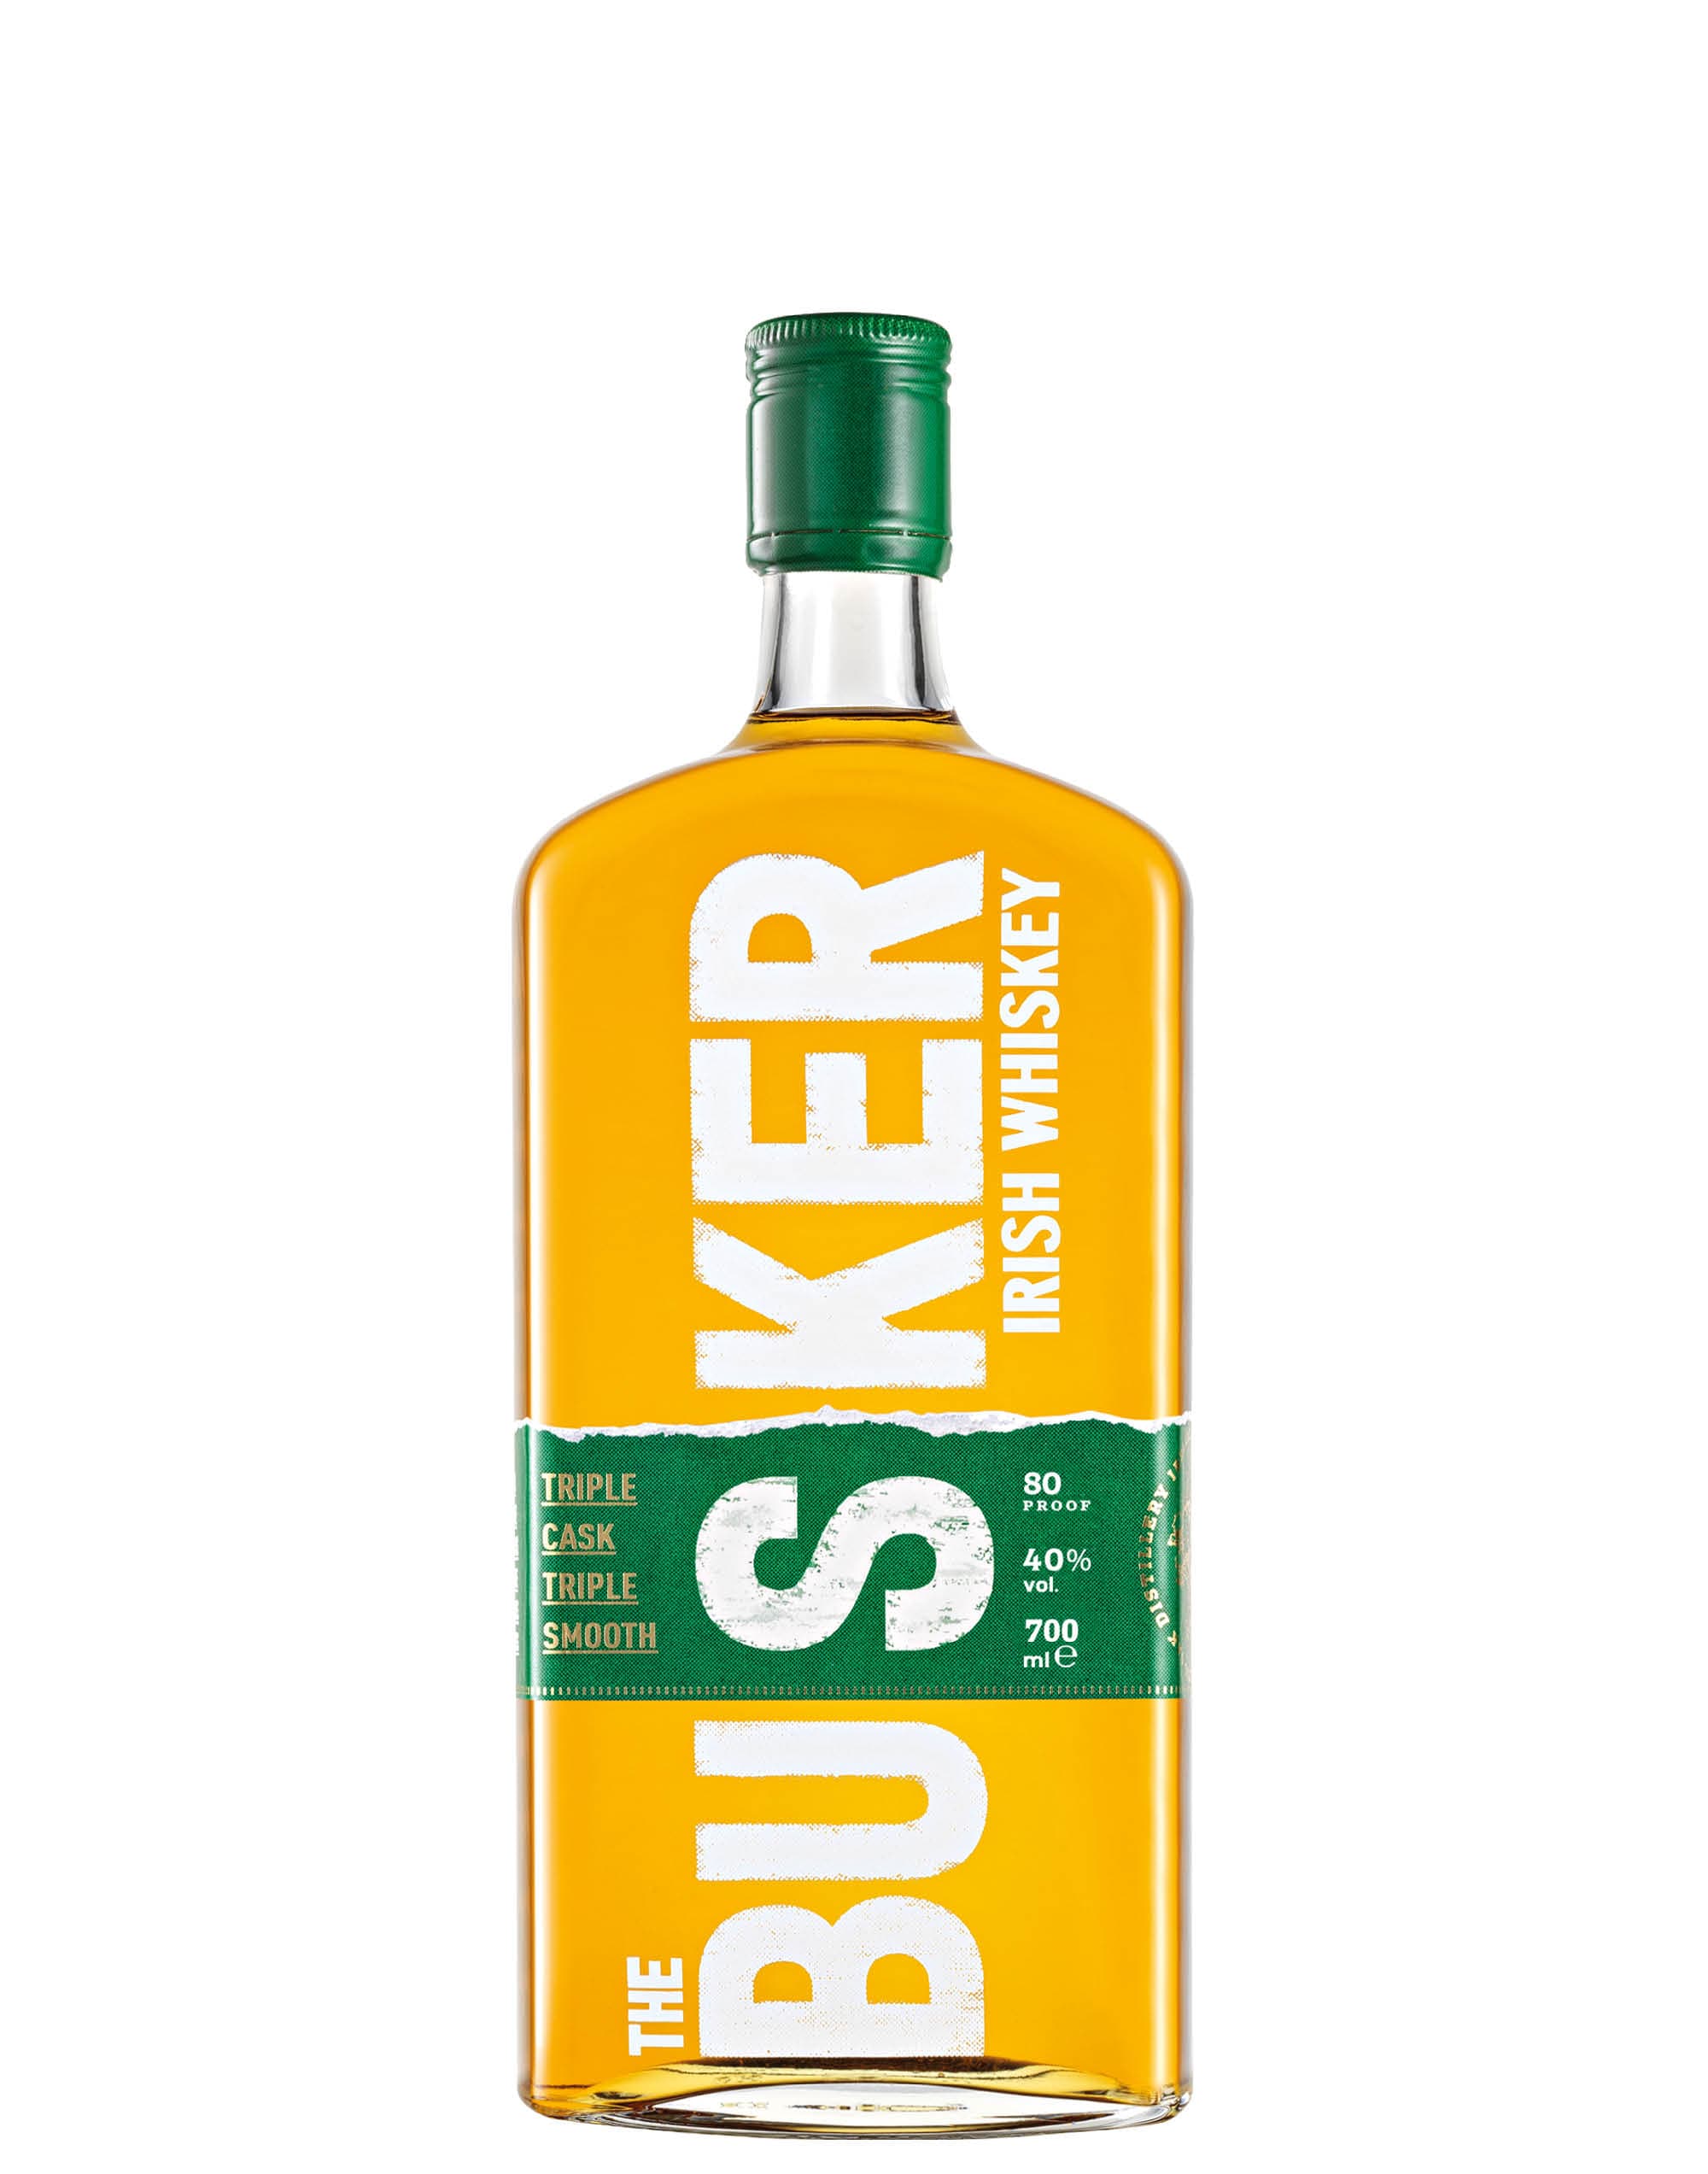 The Busker Triple Cask Triple Smooth Irish Whisky